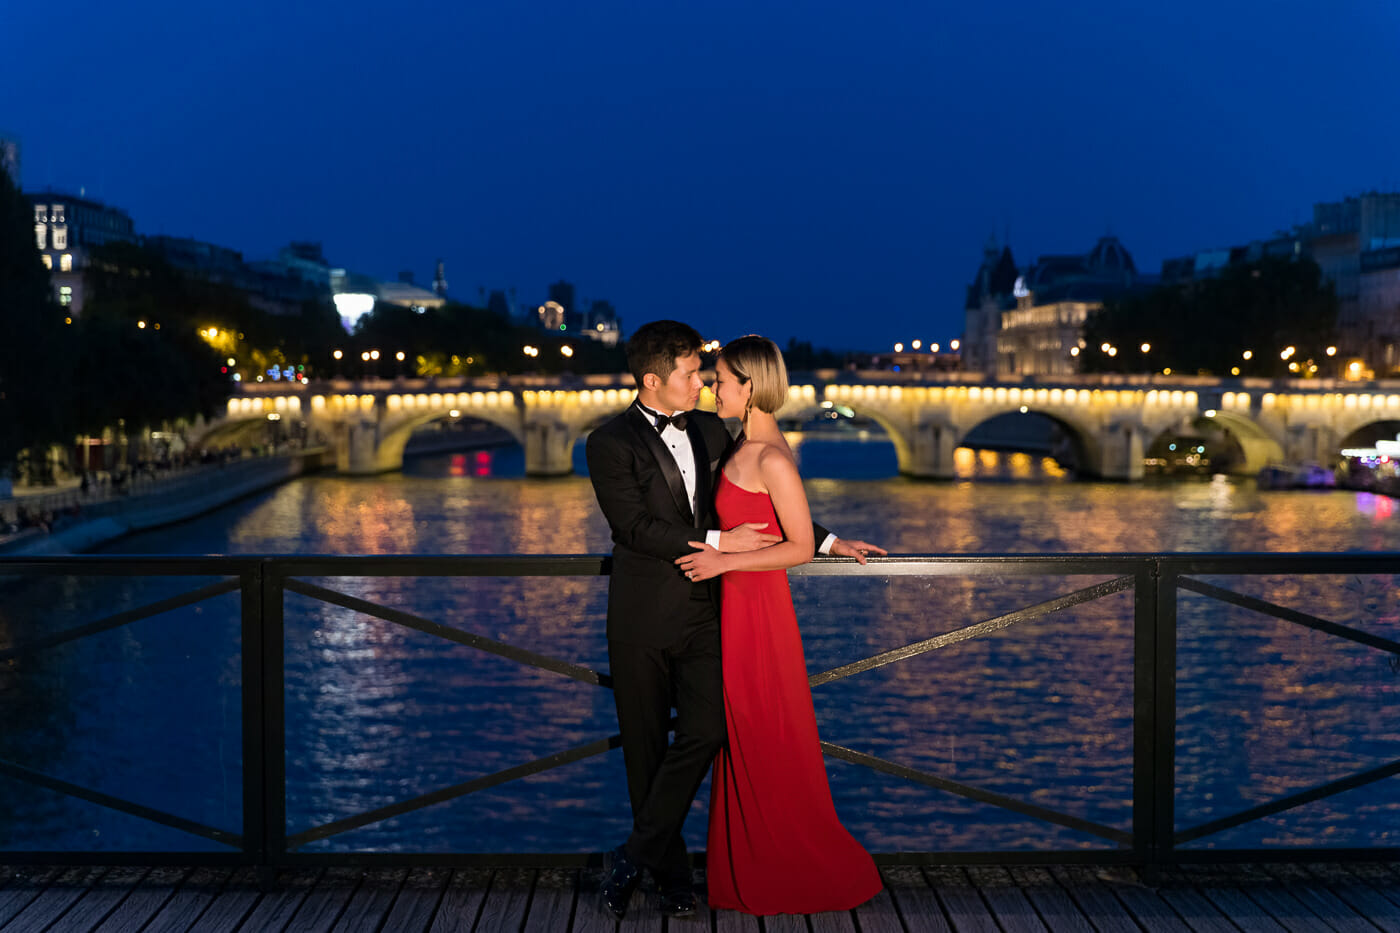 Nighttime Photoshoot in Paris during Blue Hour